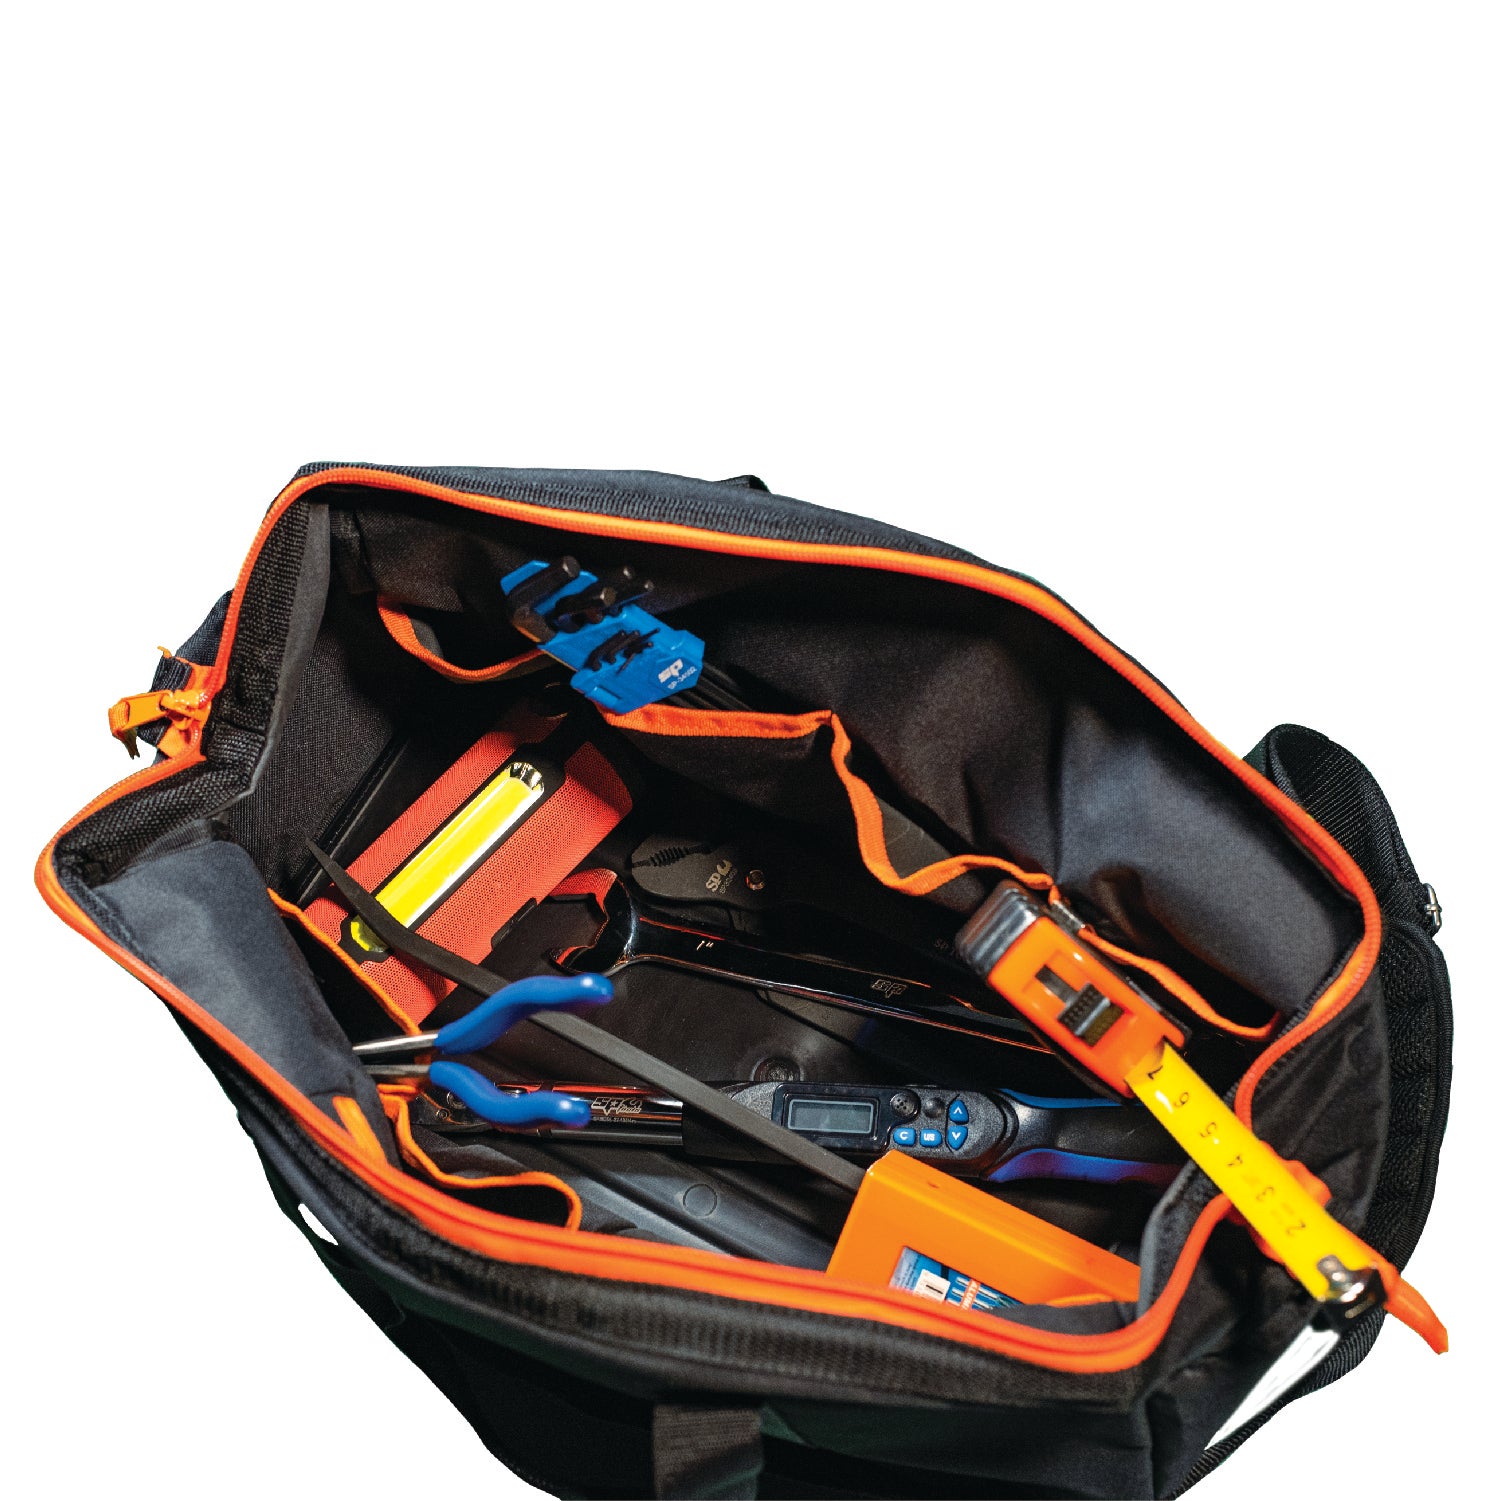 SP TOOLS OPEN MOUTH TOOL BAG